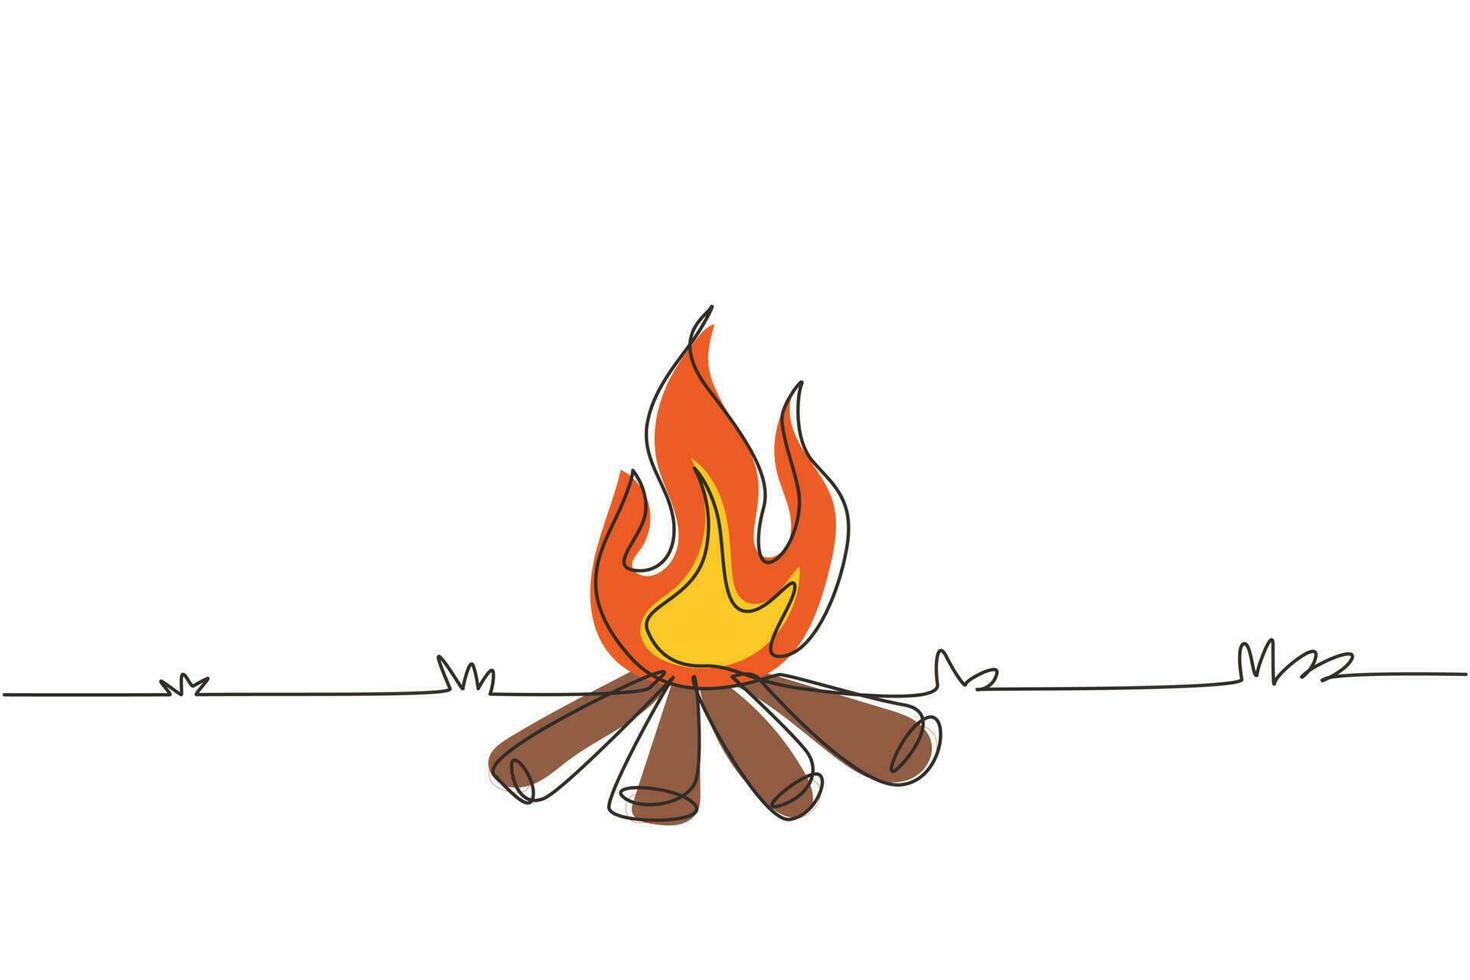 Single continuous line drawing bonfire for camping activities. Used to warm body in campsite at night, cooking food, water for hot tea. Equipment for hiking, travel, trip. One line draw design vector